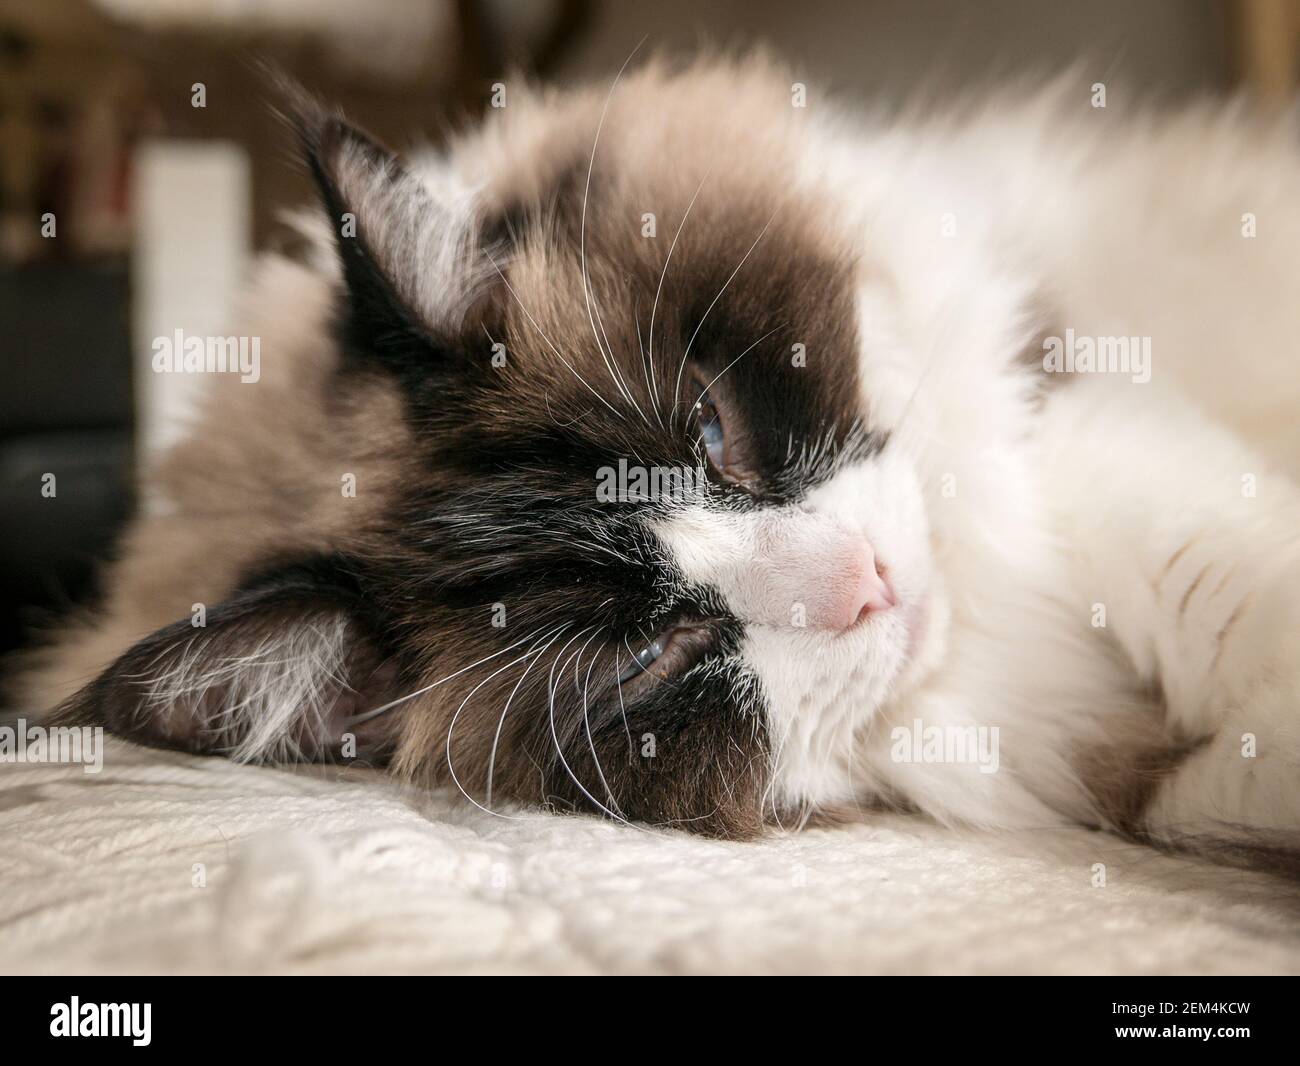 Big close-up of an English Ragdoll cat showing bicolour facial markings and long eye-lashes when in somnolent mood Stock Photo